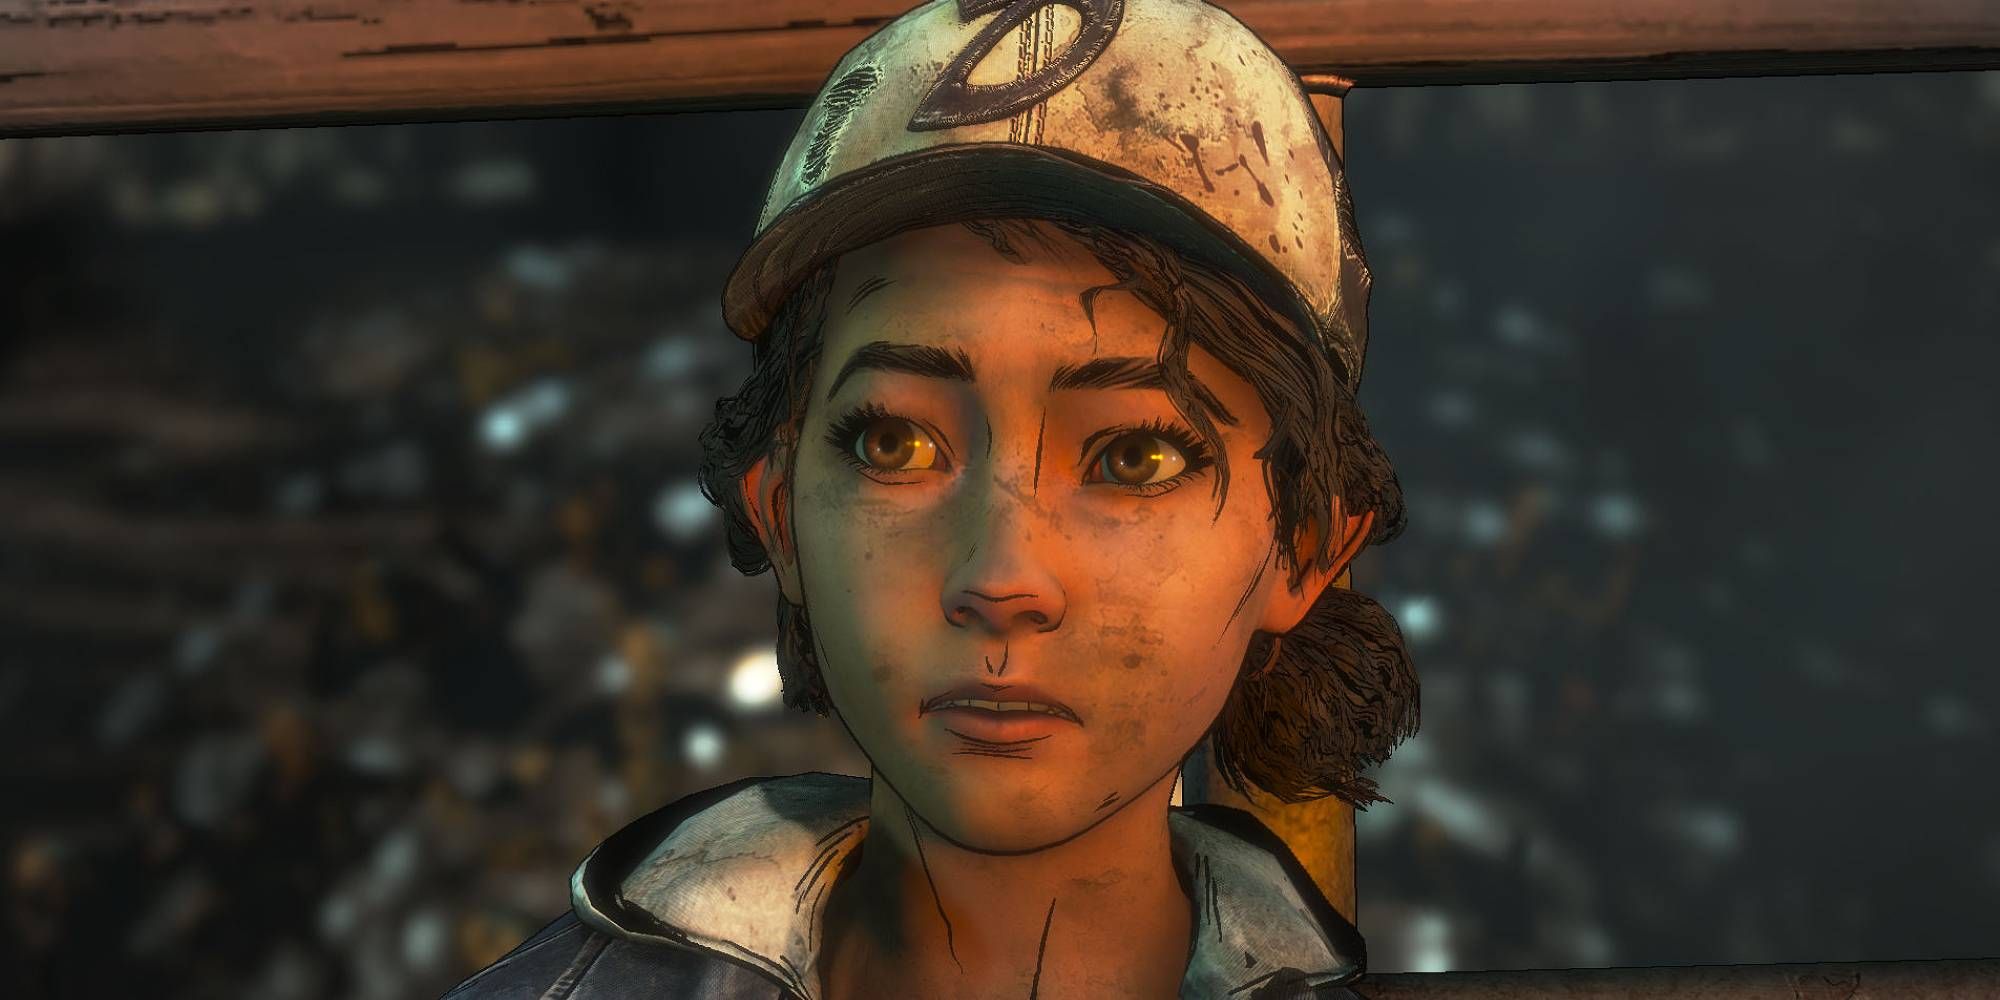 Clementine of The Walking Dead stares at something off-camera